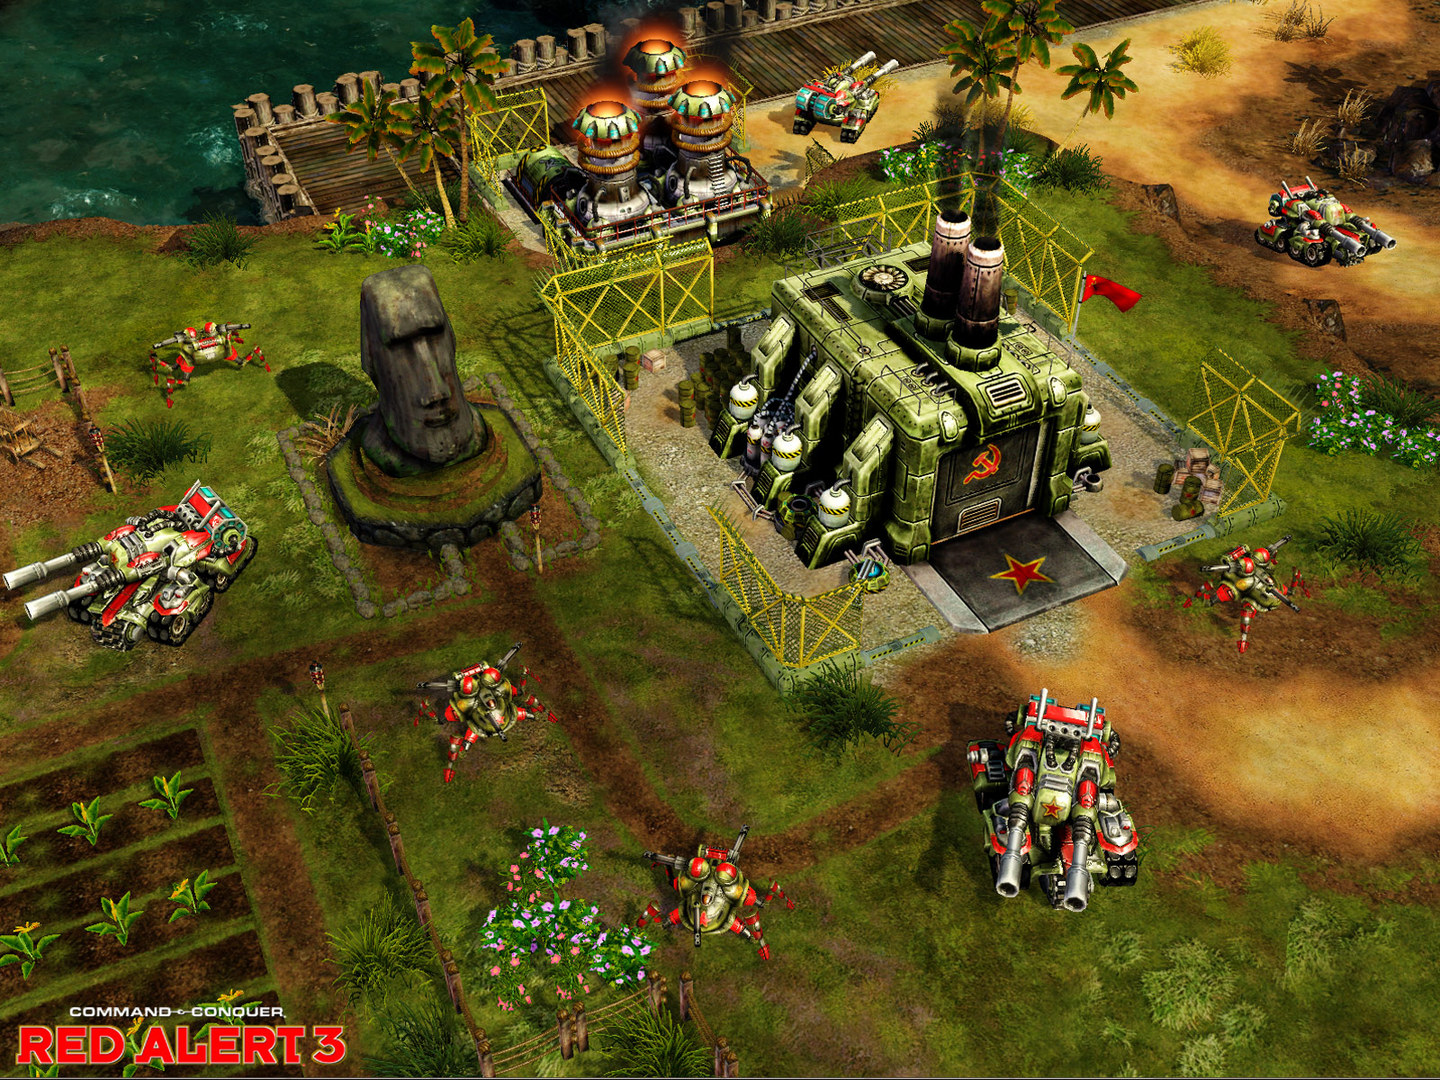 Command & Conquer: Red Alert 3 on Steam